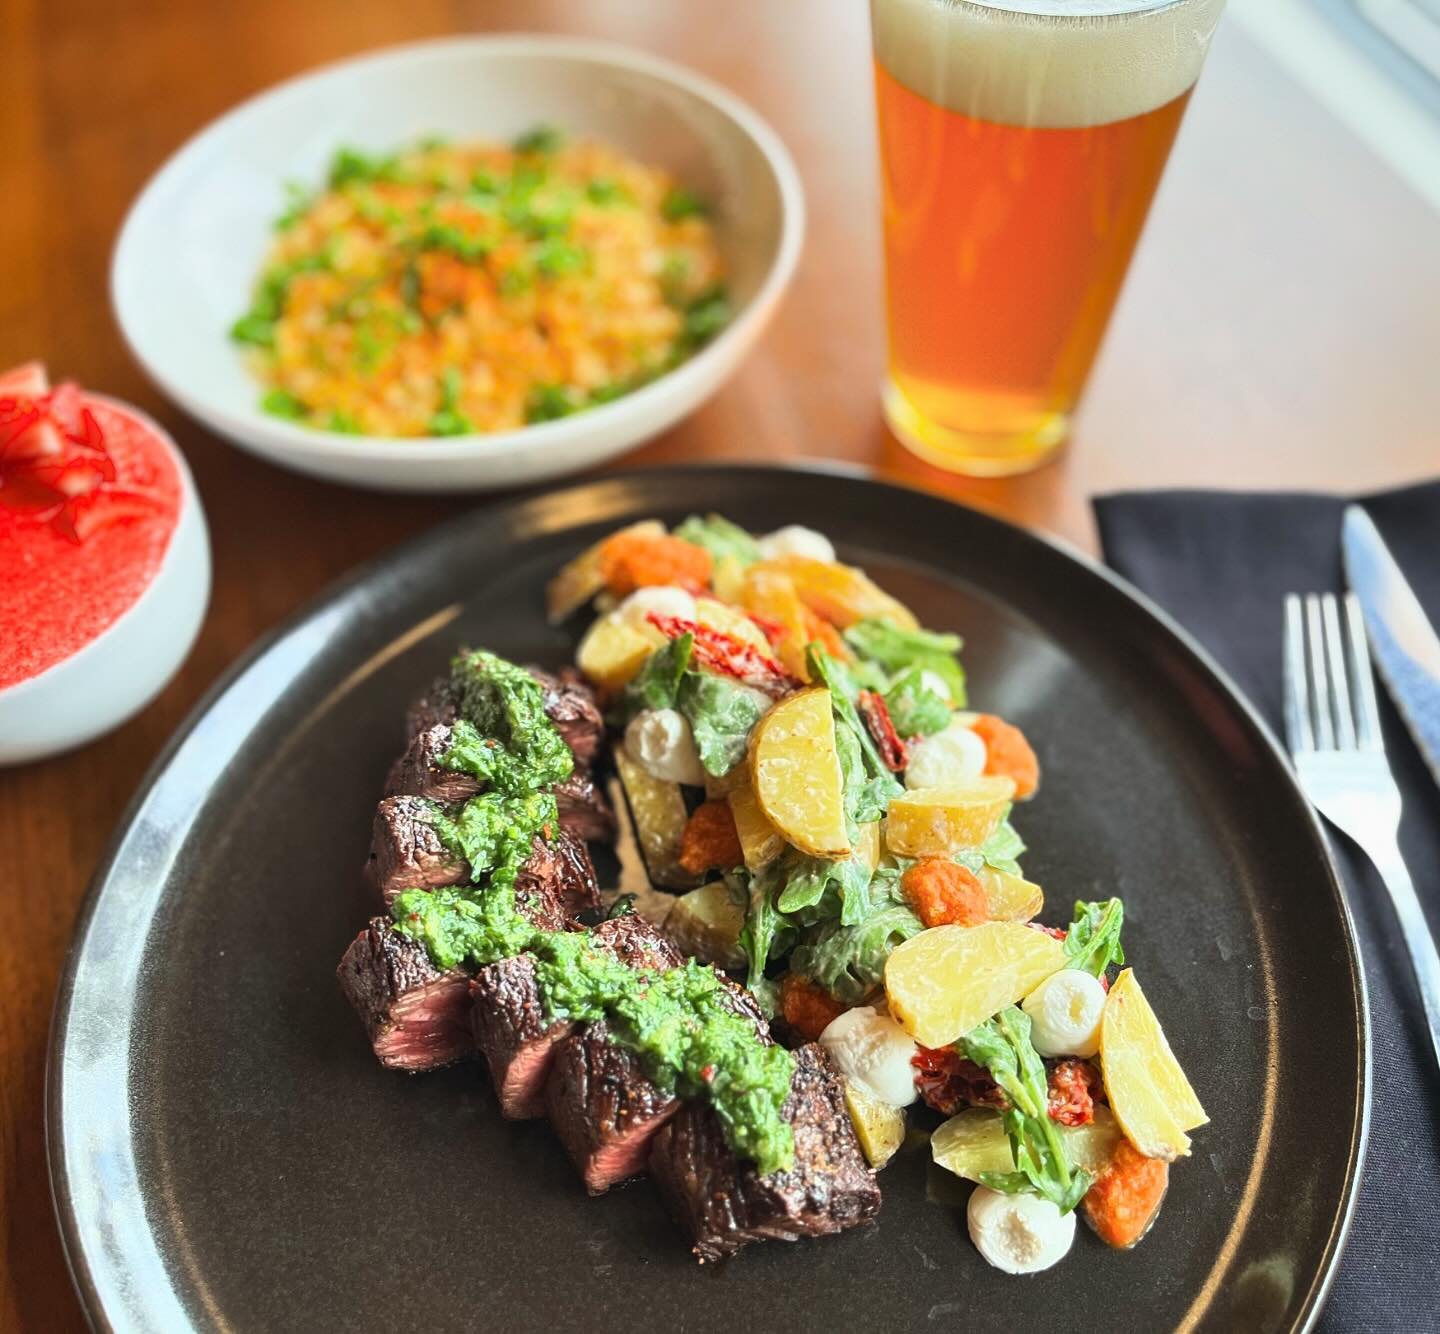 The seasons are changing and so is our menu. Check out new options this weekend, and some twists on the classics! Open Thursday-Saturday, 5pm-9pm. 

#hangersteak #potatosalad #springtime #dinnertime #goodfood #fromscratch #nightmoves #moonlighter #dt